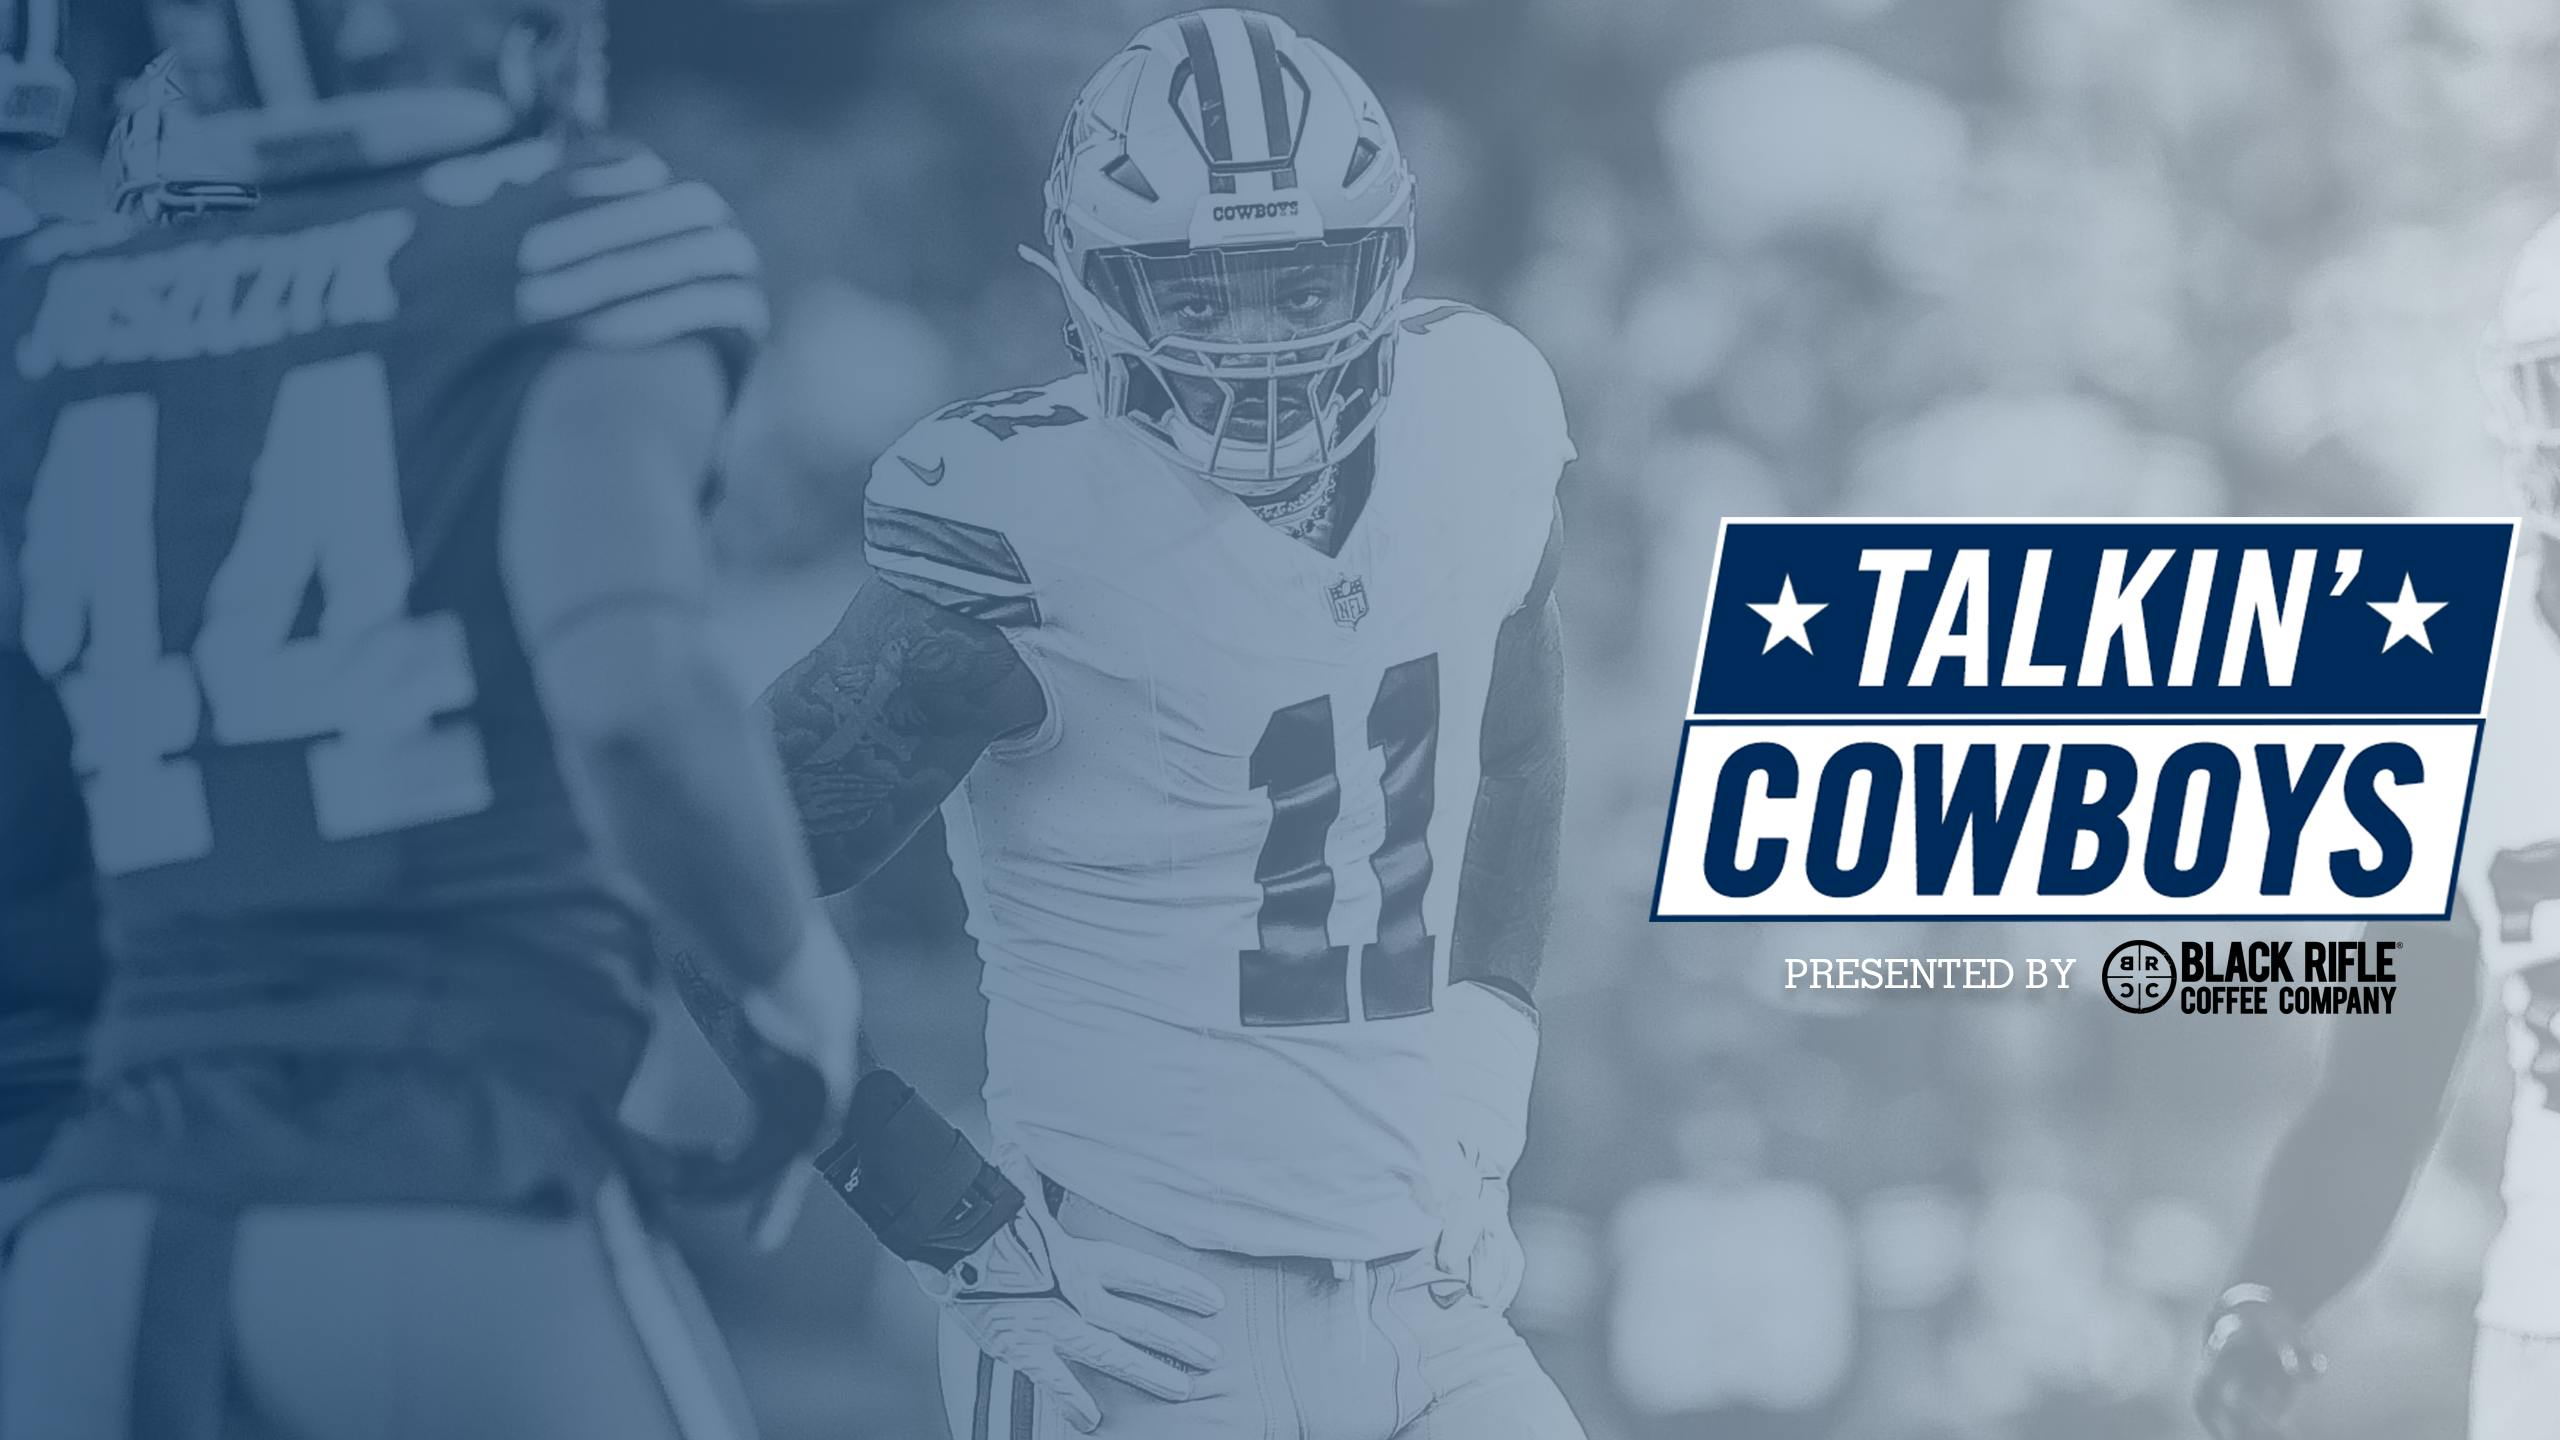 Talkin' Cowboys: Turn the Page